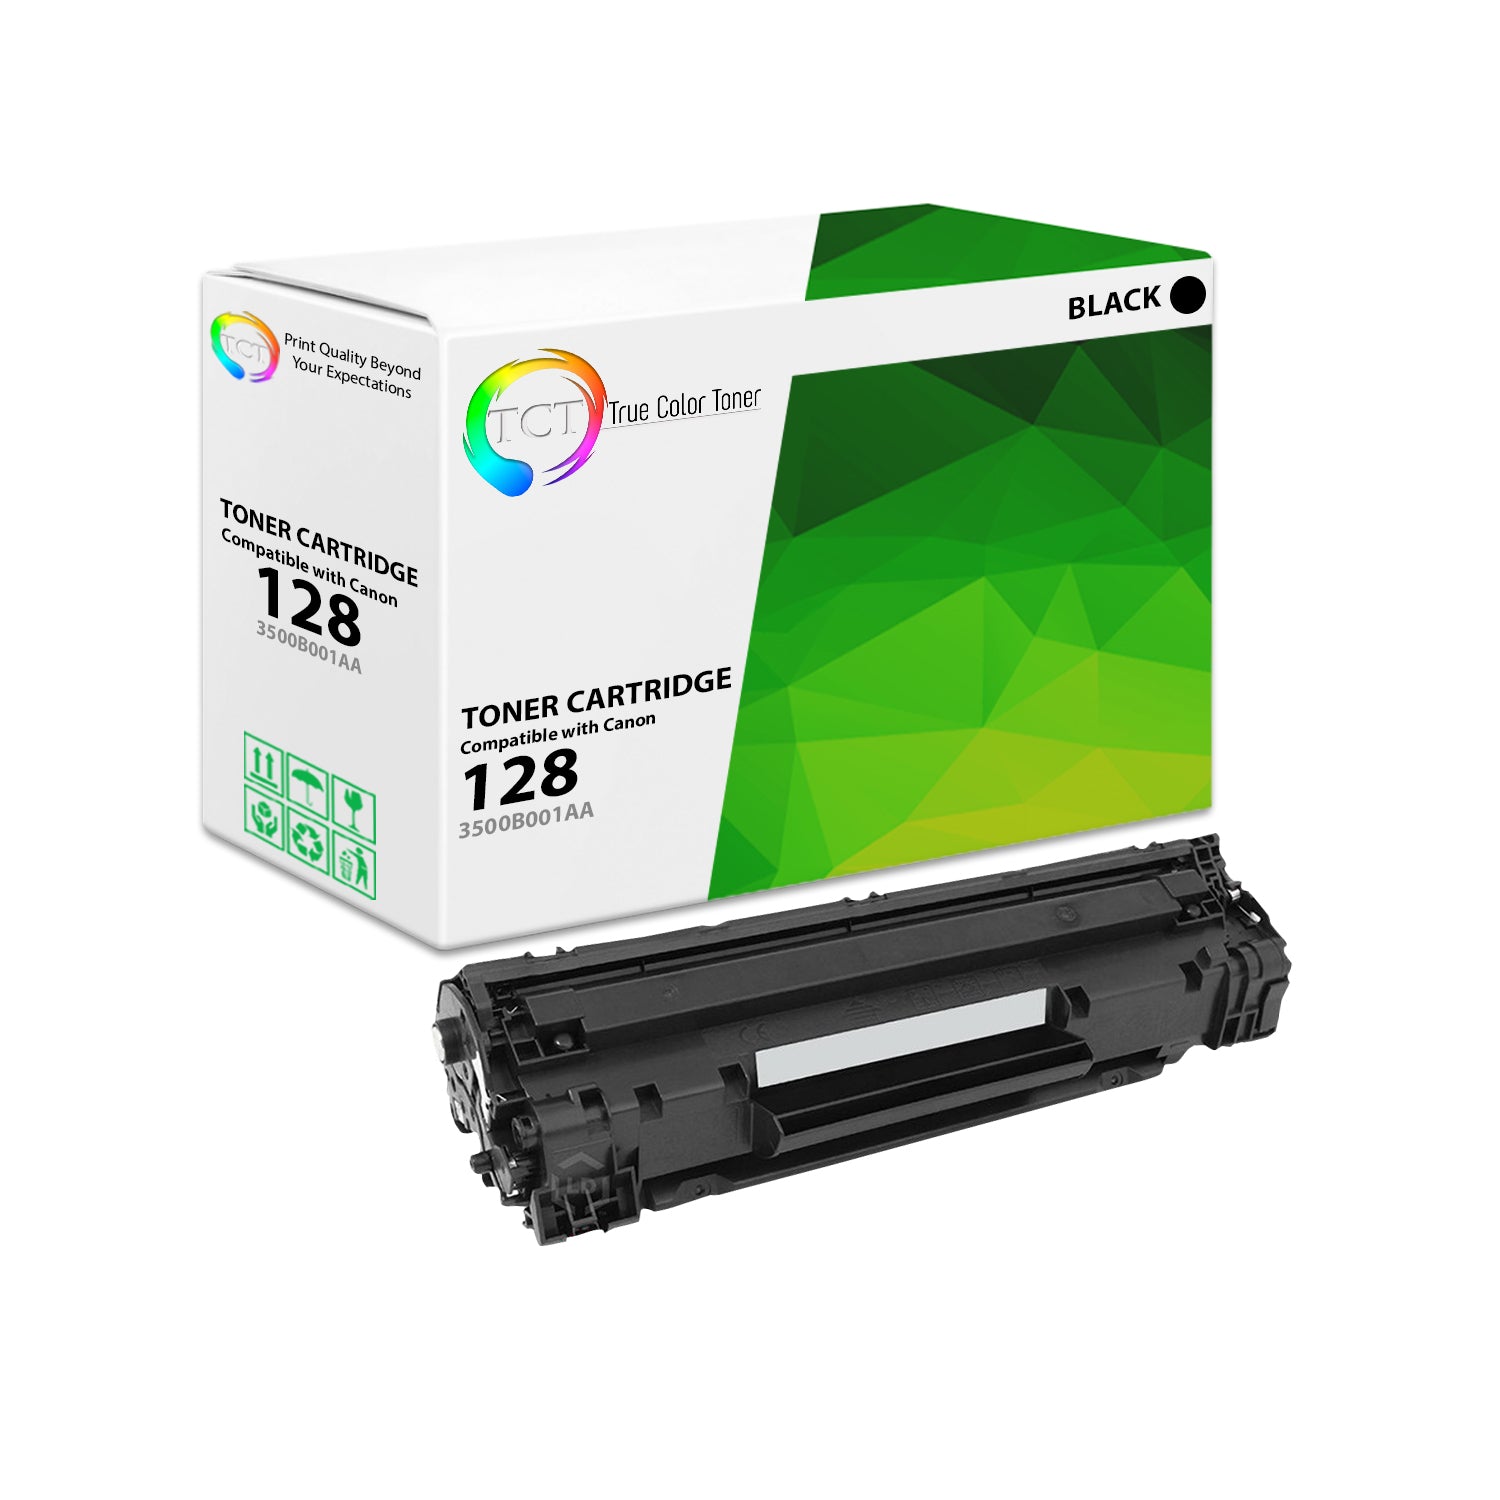 TCT Compatible Toner Cartridge Replacement for the Canon 128 Series - 1 Pack Black